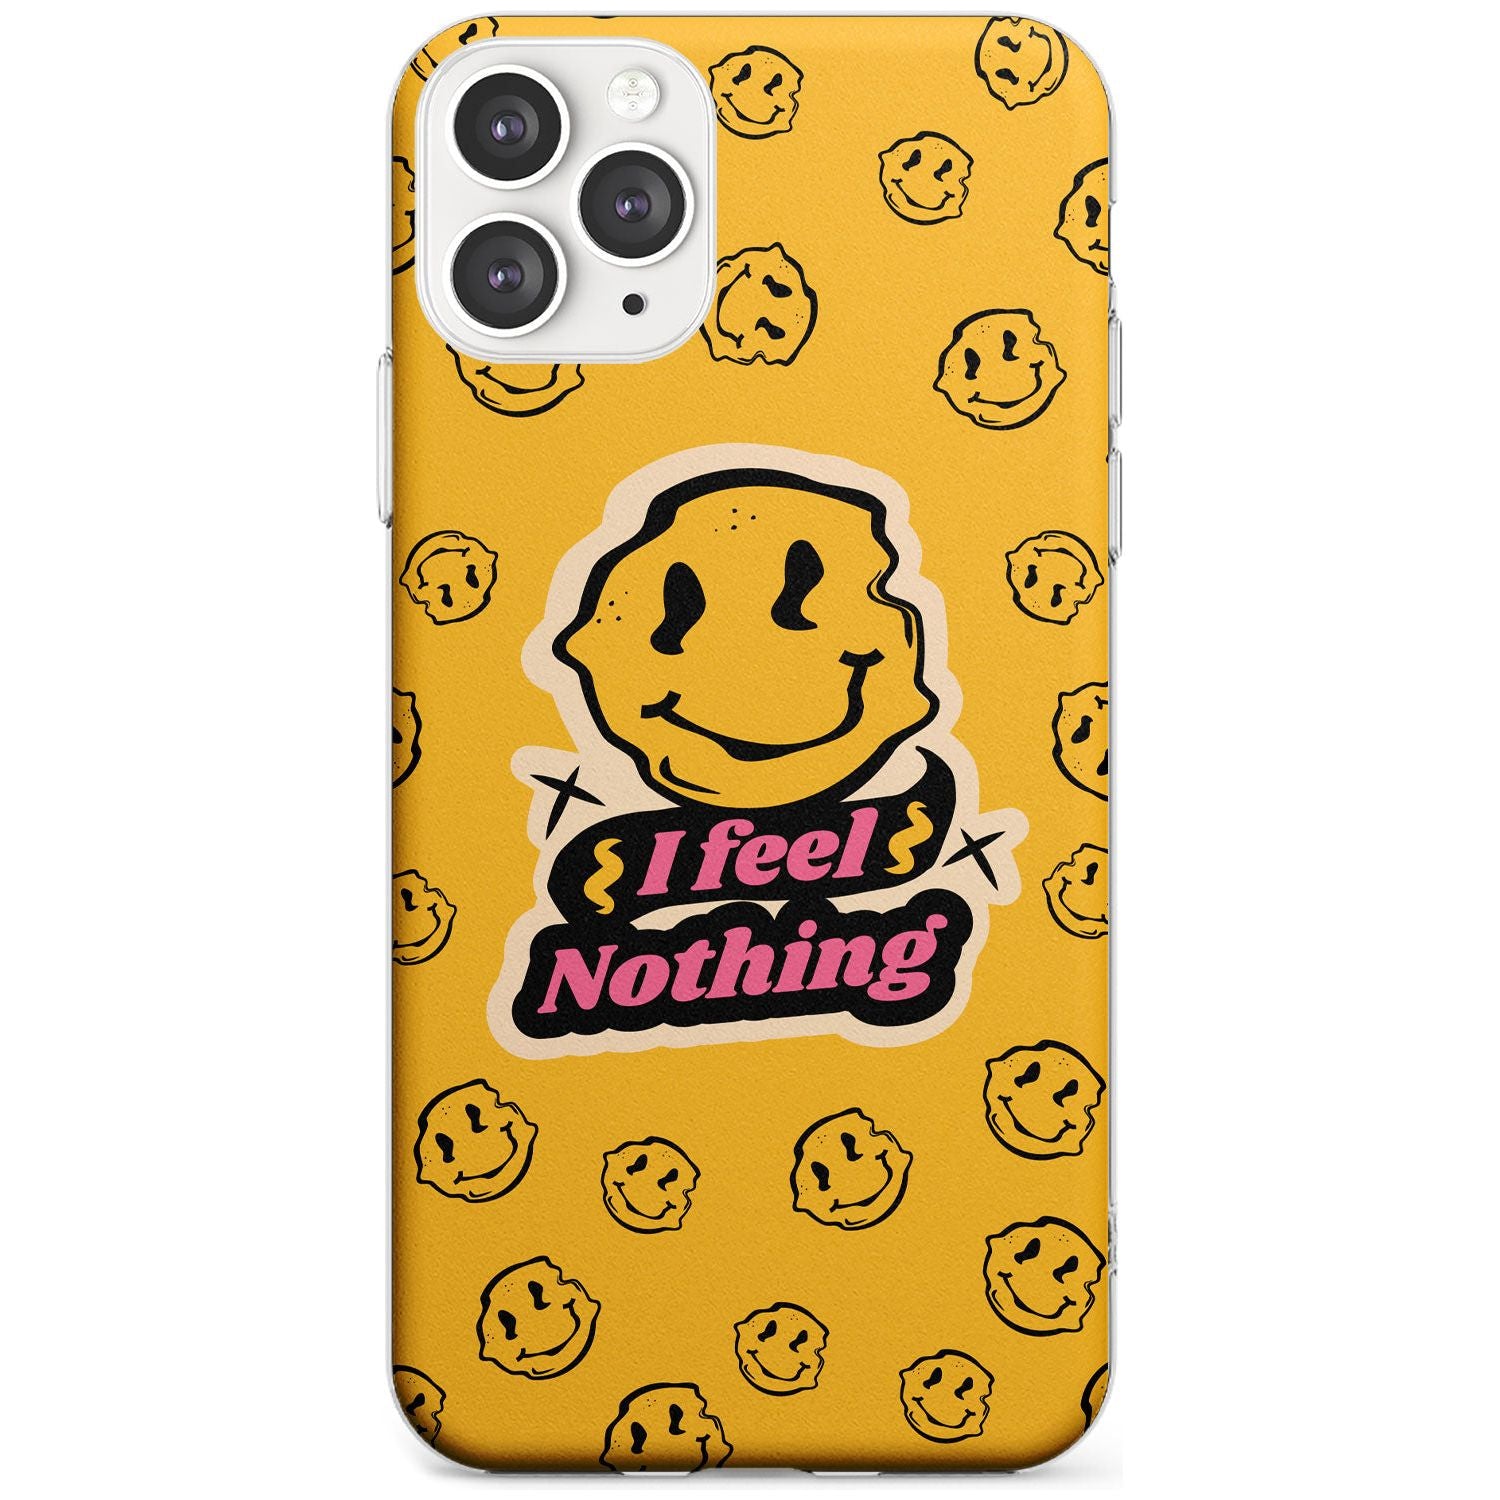 I feel nothing Slim TPU Phone Case for iPhone 11 Pro Max